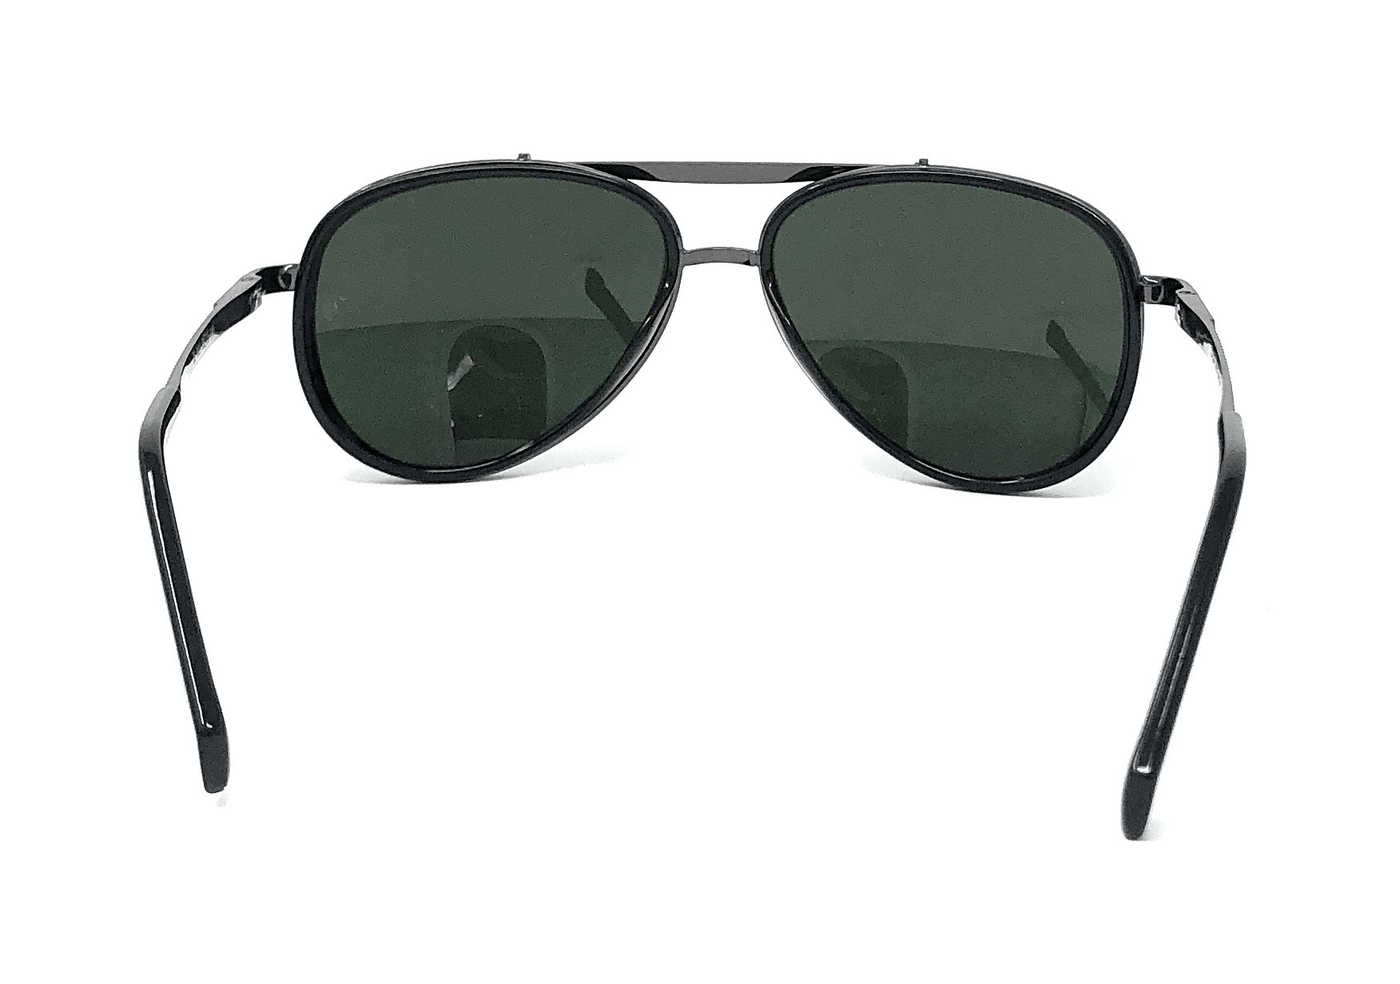 Classic Metal Frame Aviator Silver Sunglasses For Men And Women-Unique and Classy